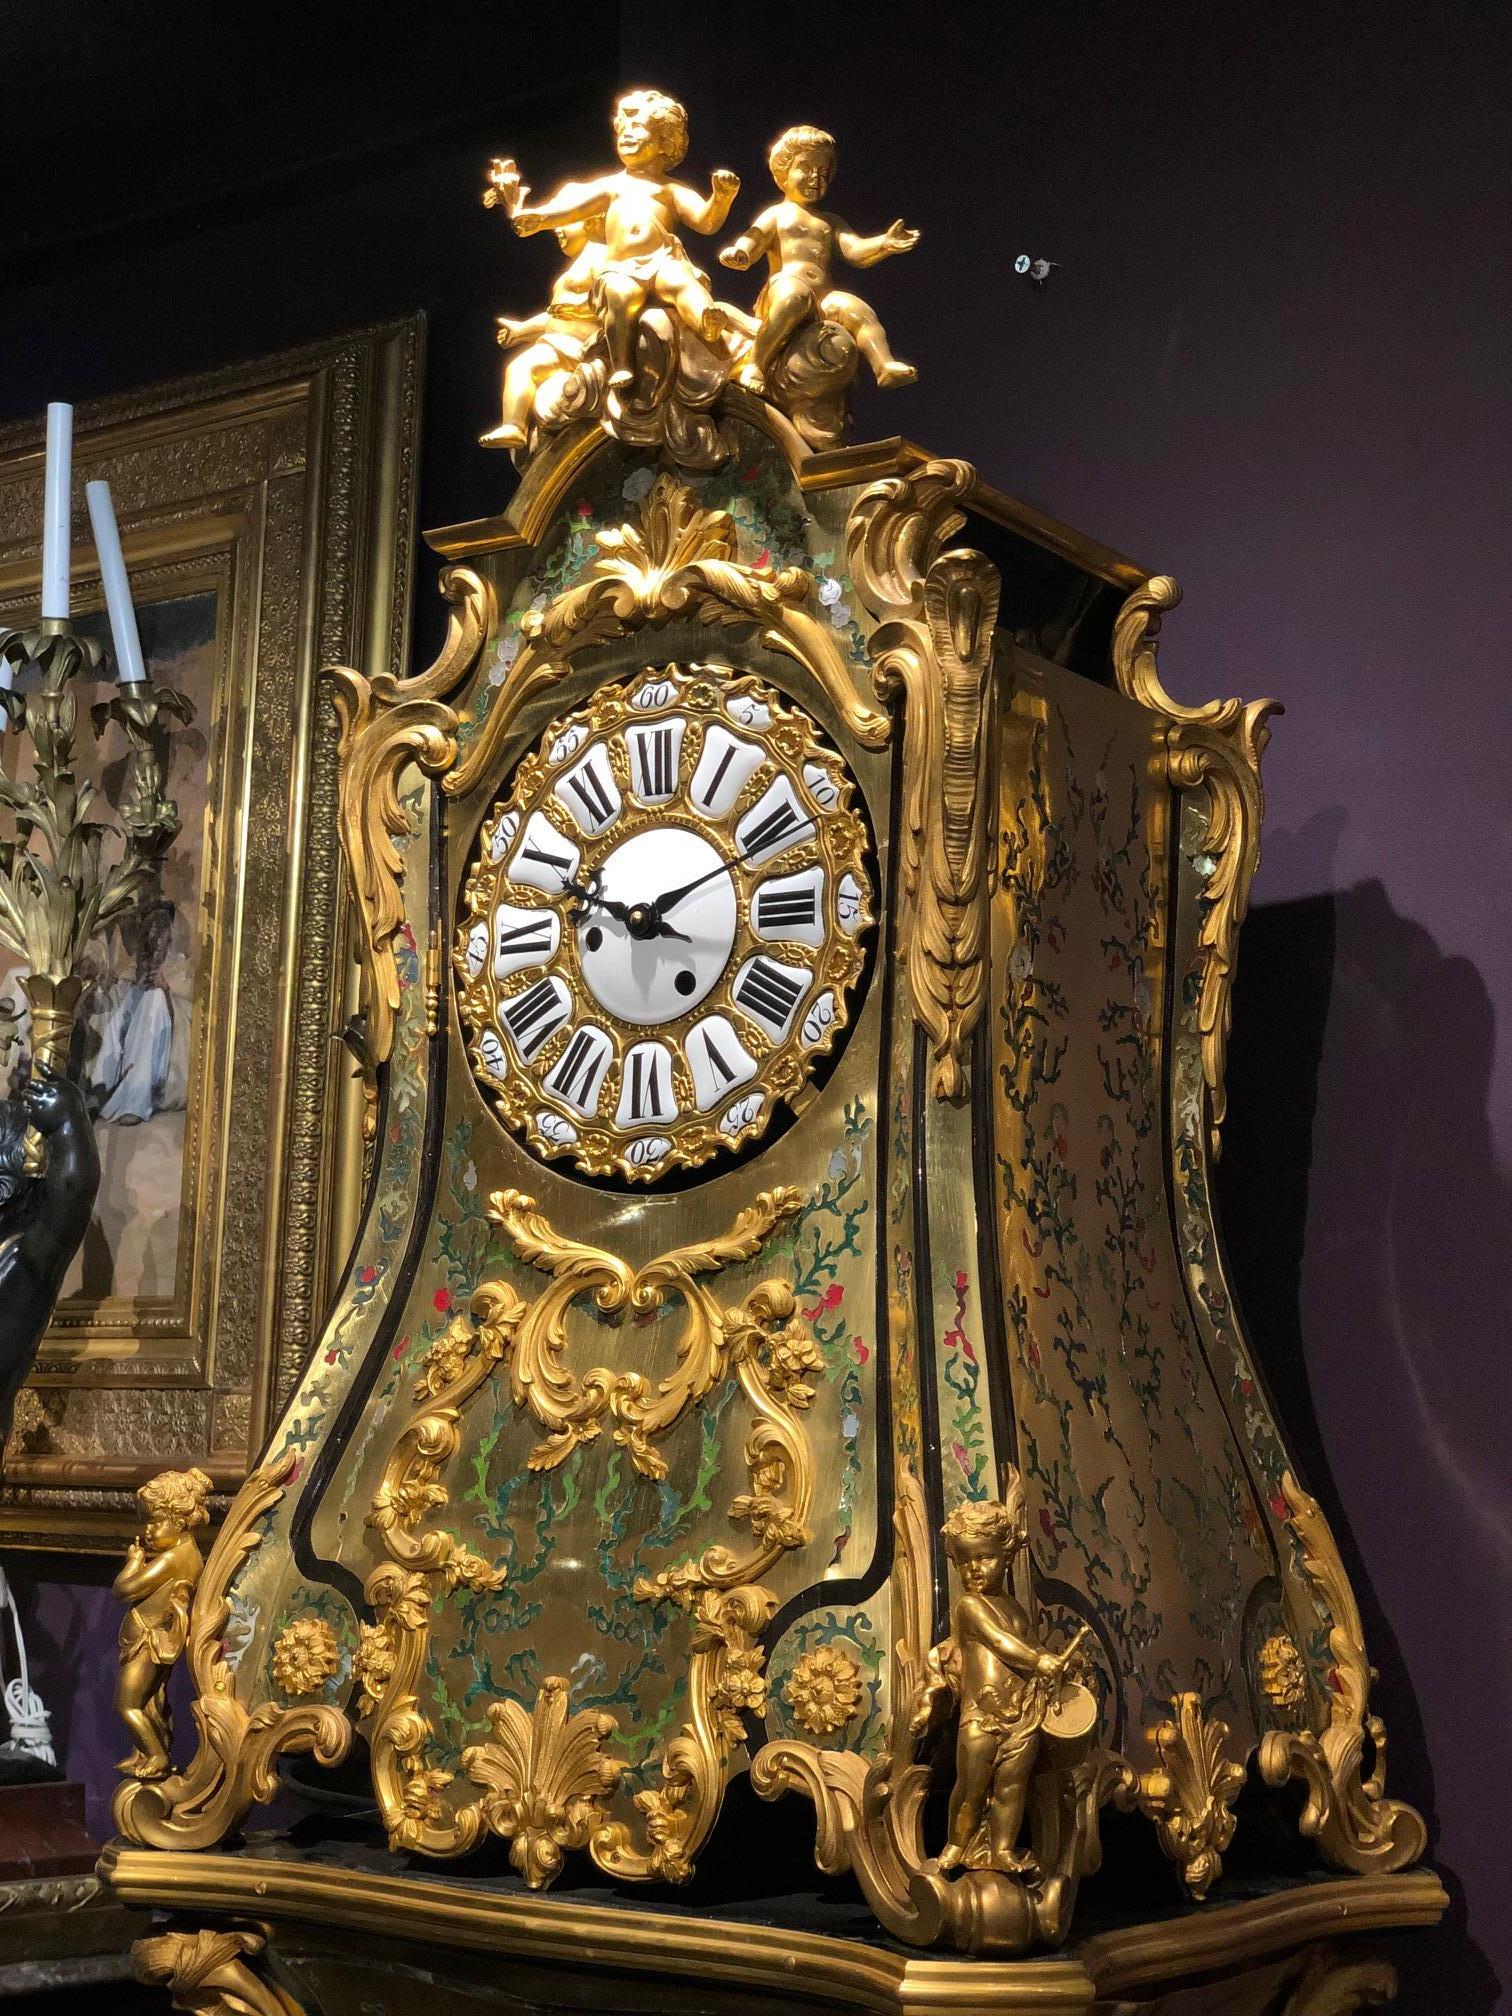 A rare and important French Louis XIV style gilt bronze mounted green boulle marquetry clock, Regulateur De Parquet, with matching original pedestal, circa 1890s. After the Model by Jean-Pierre Latz.

This fabulous clock and its matching pedestal